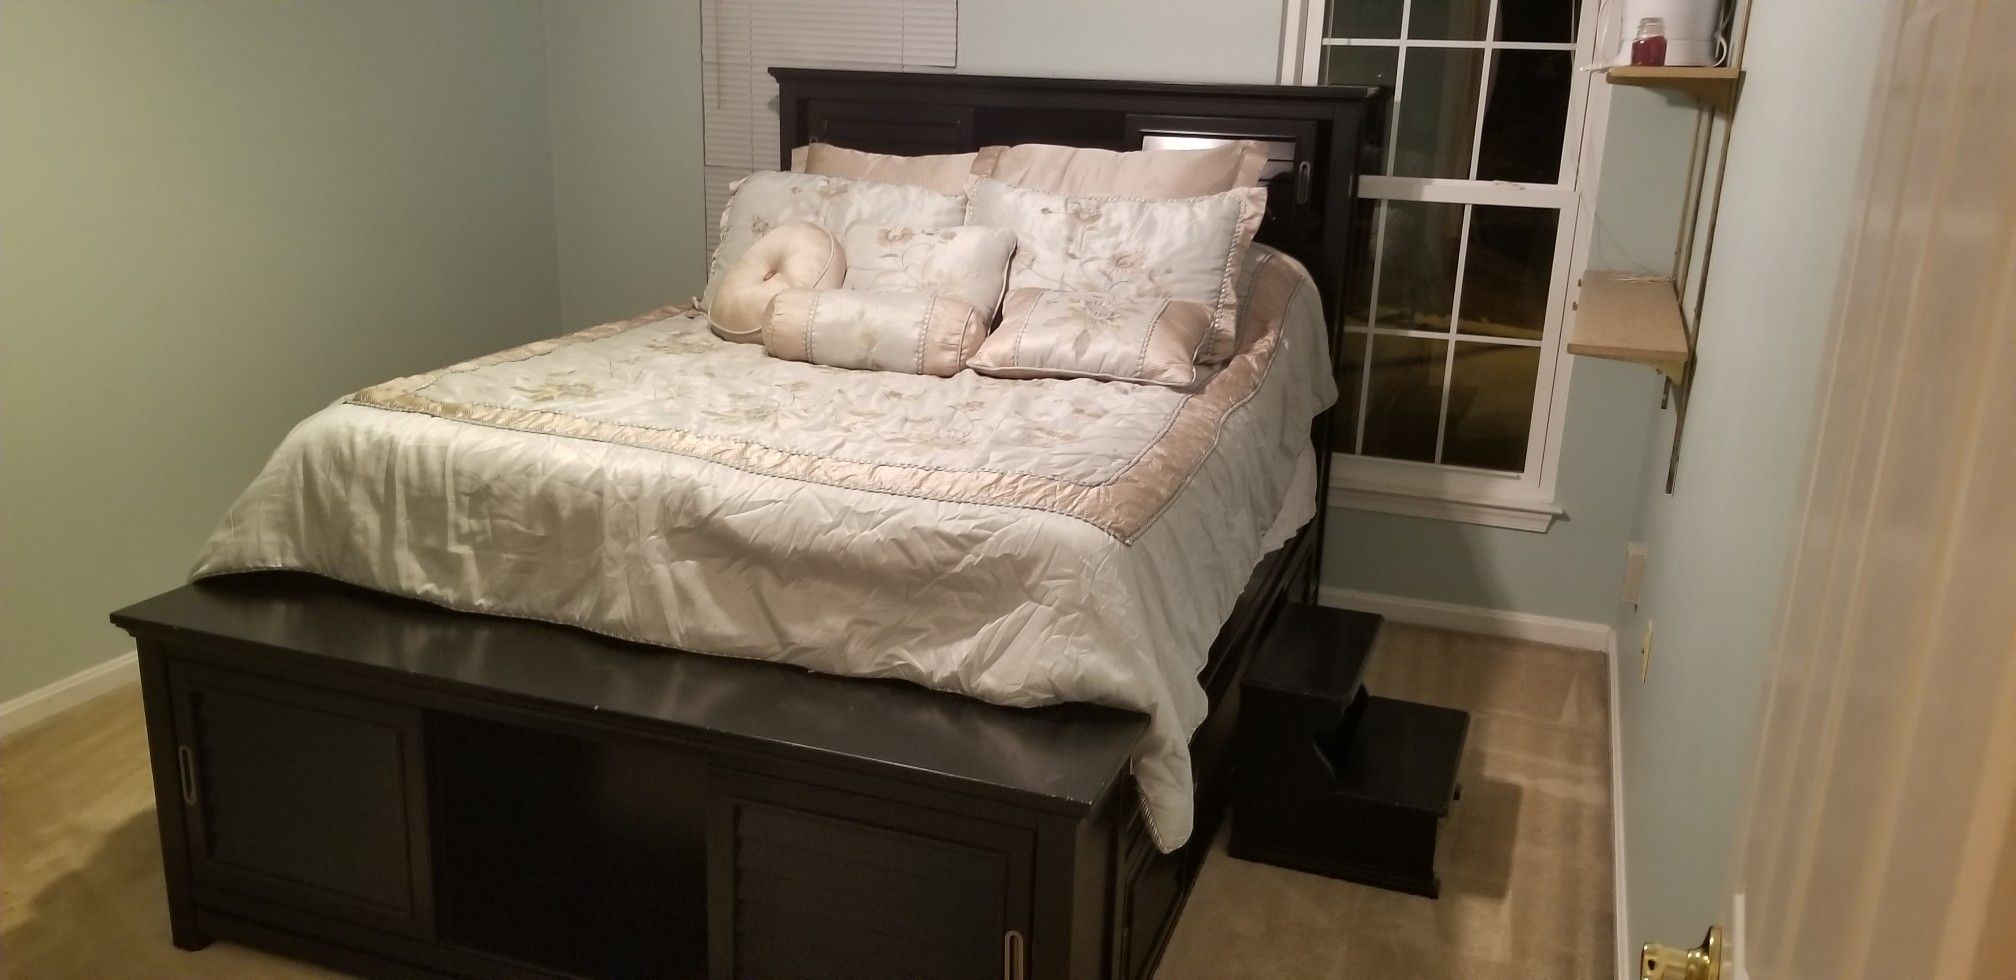 Queen size bed frame with storage gallore